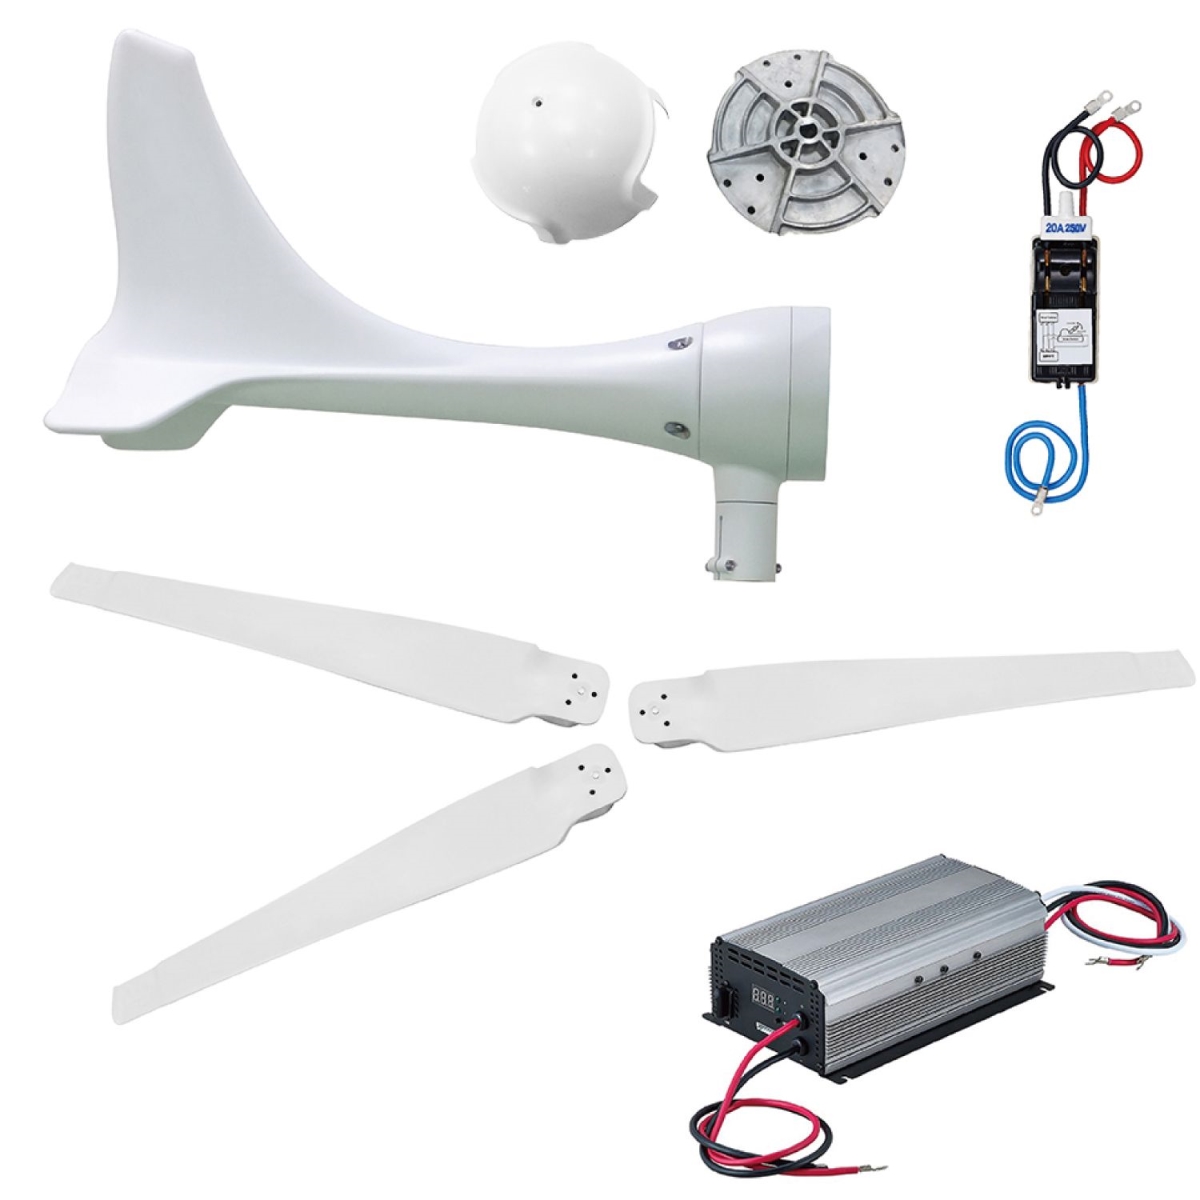 Picture of Automaxx Windmill UB0600S1BL 600W (12V/24V) (50A/25A) Wind Turbine Generator kit with Bluetooth Controll  Additional Spare Blade Set.